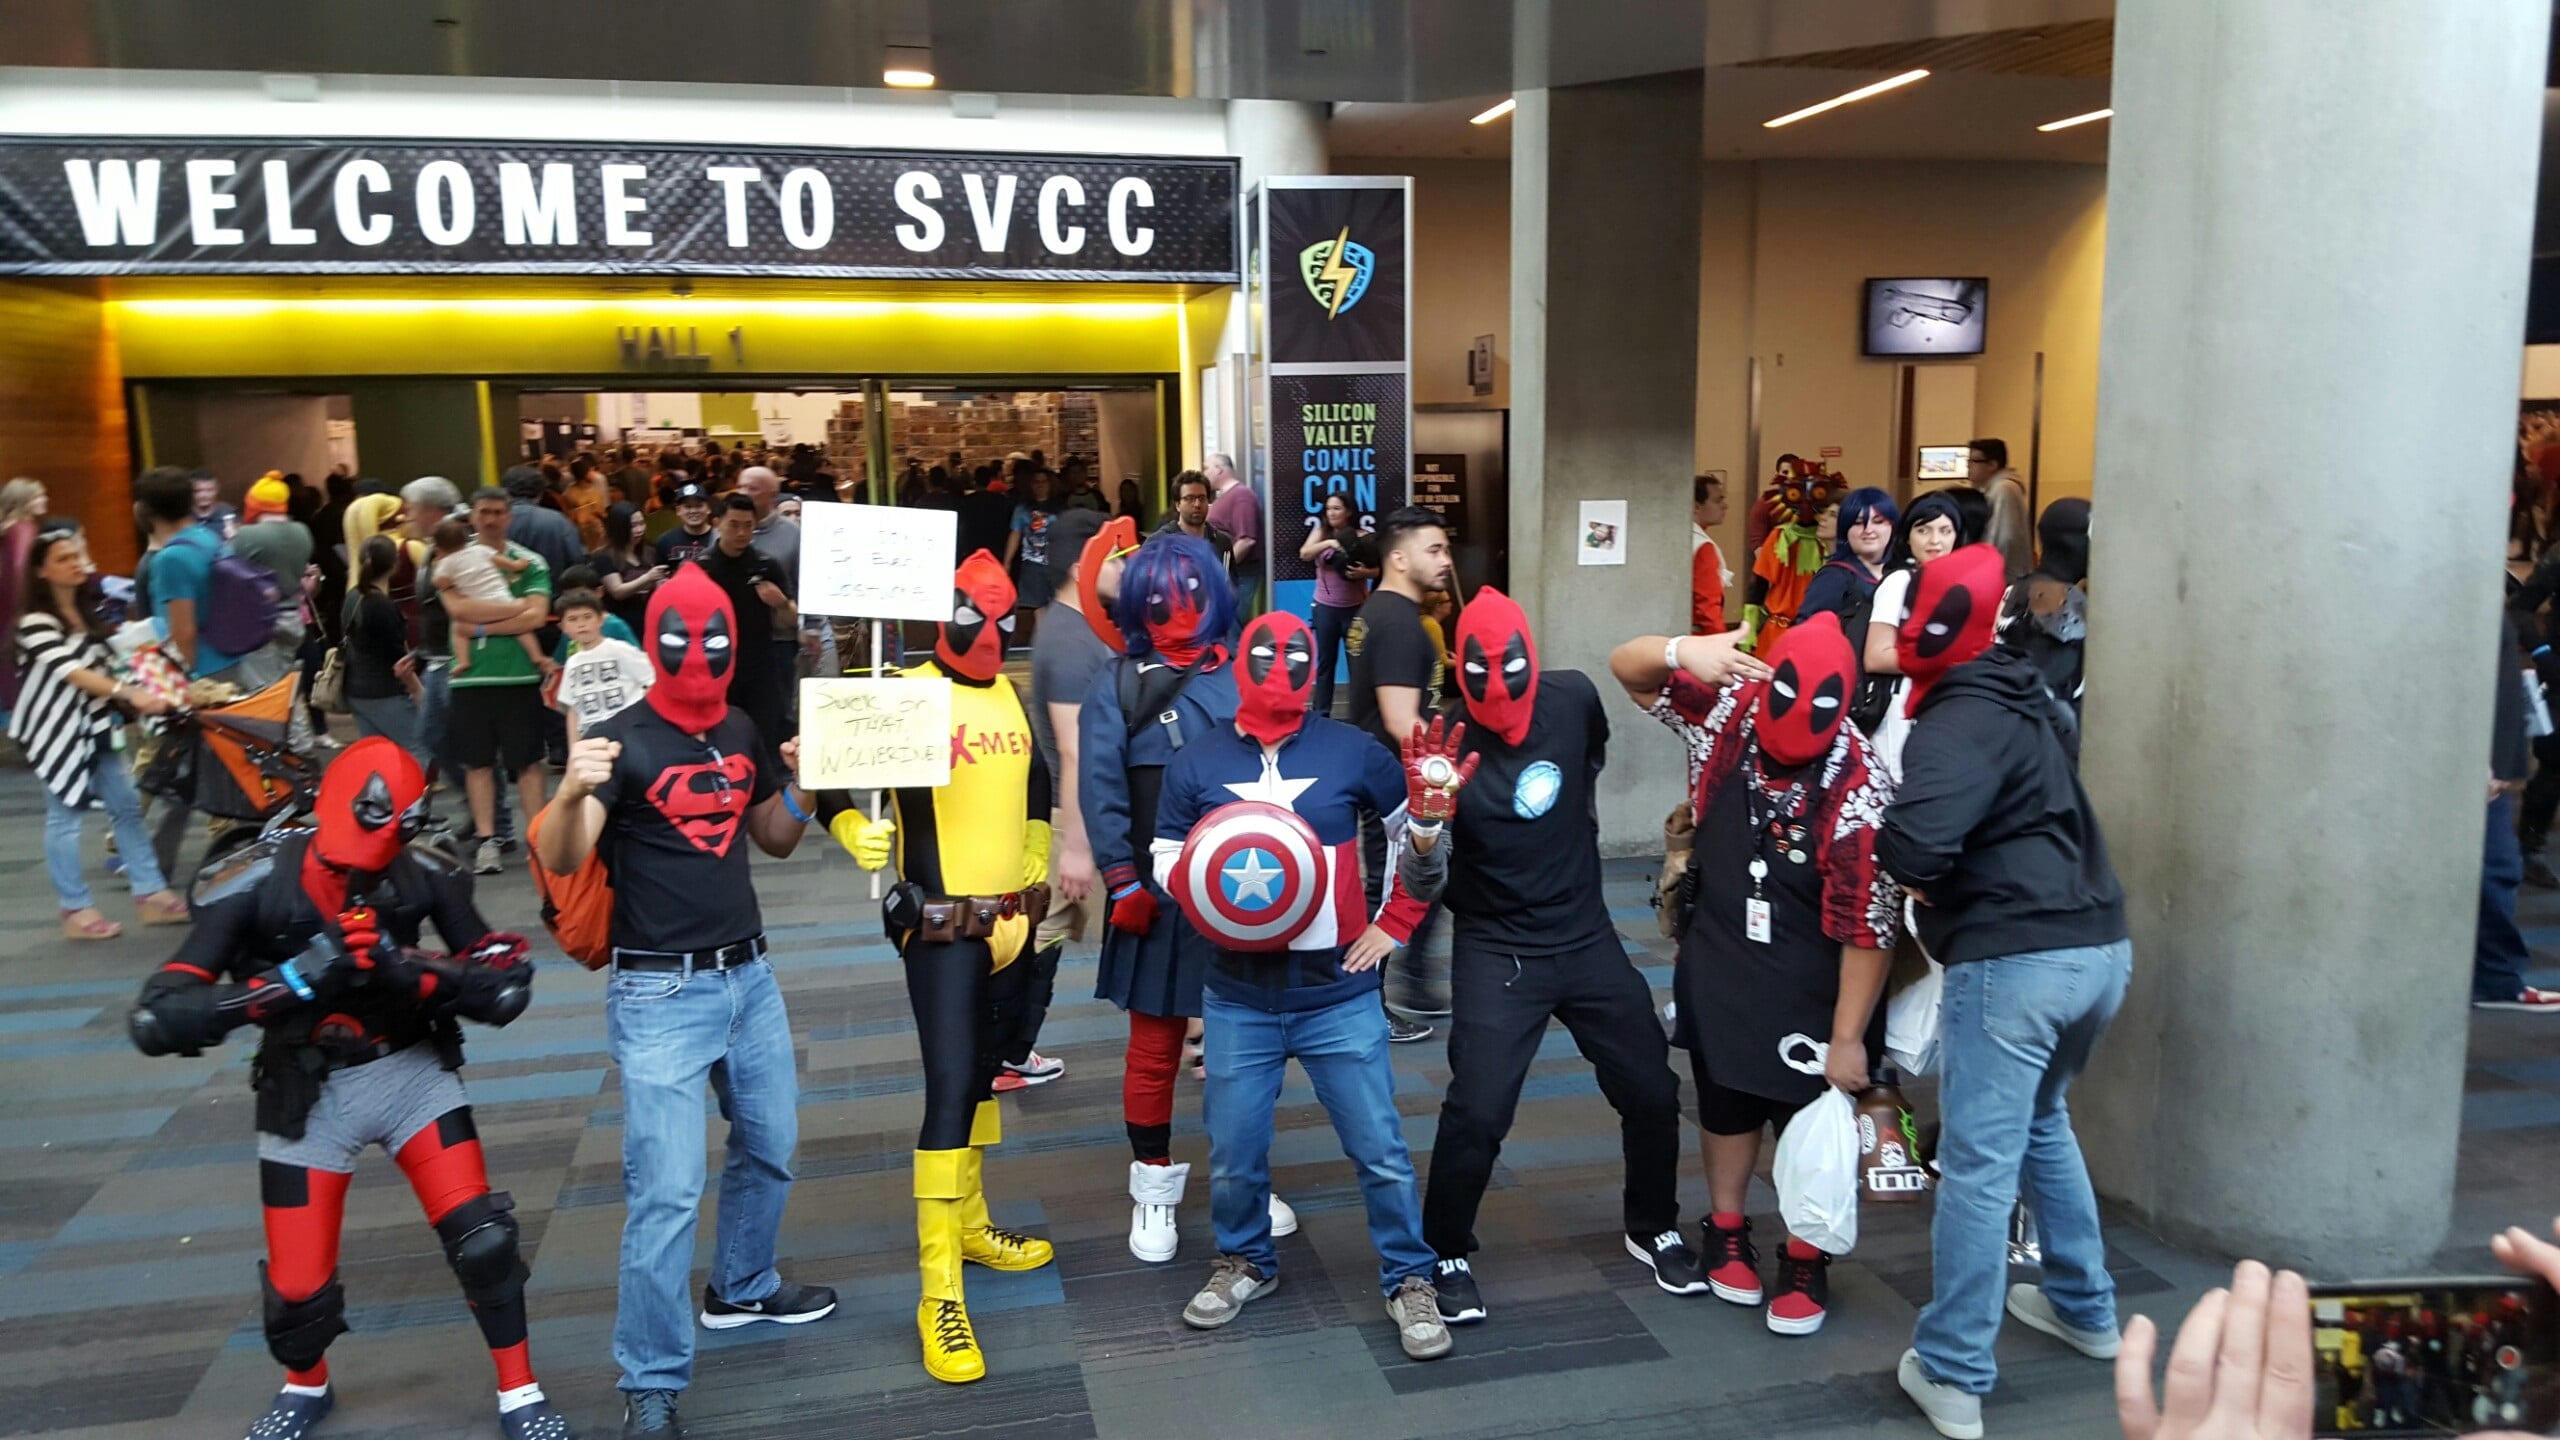 Deadpools San Diego Comic-Con 2020 is cancelled, for the first time in its 50 year history, but it just might be the best thing that’s happened for the geek community.